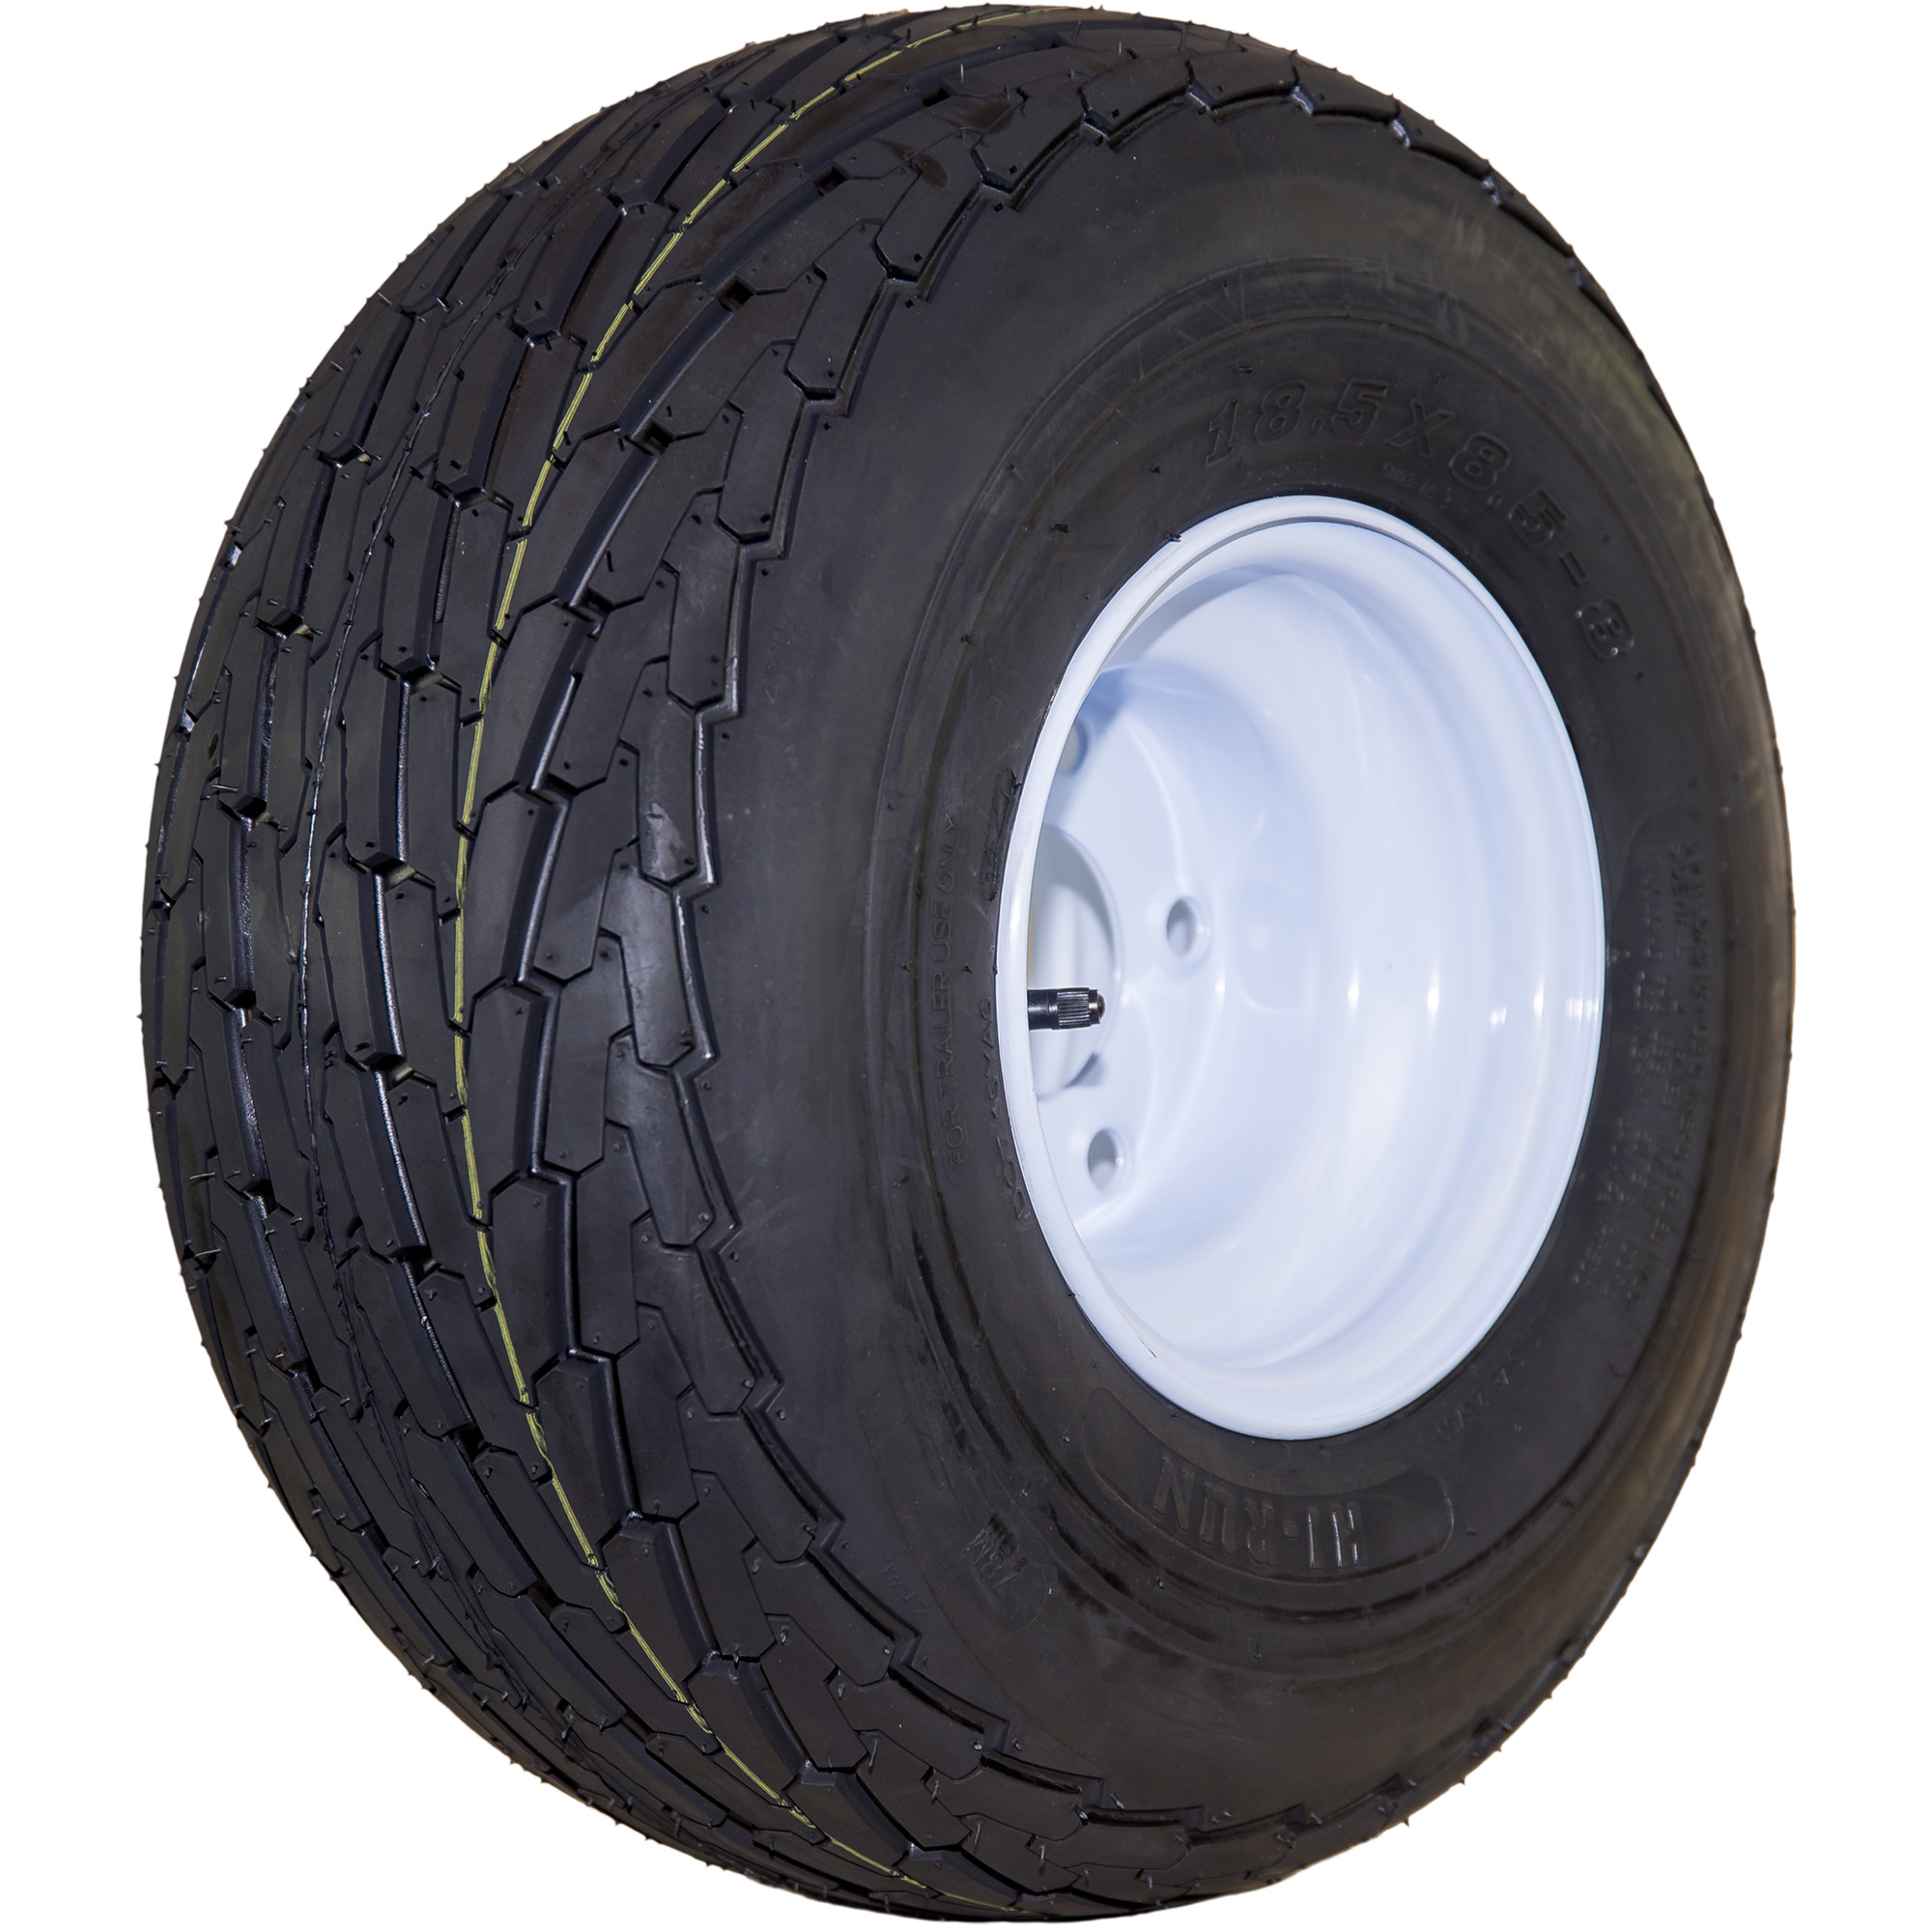 HI-RUN, Highway Trailer Tire Assembly, Bias-Ply, Tire Size 18.5X8.5-8 Load Range Rating C, Bolt Holes (qty.) 5 Model ASB1026